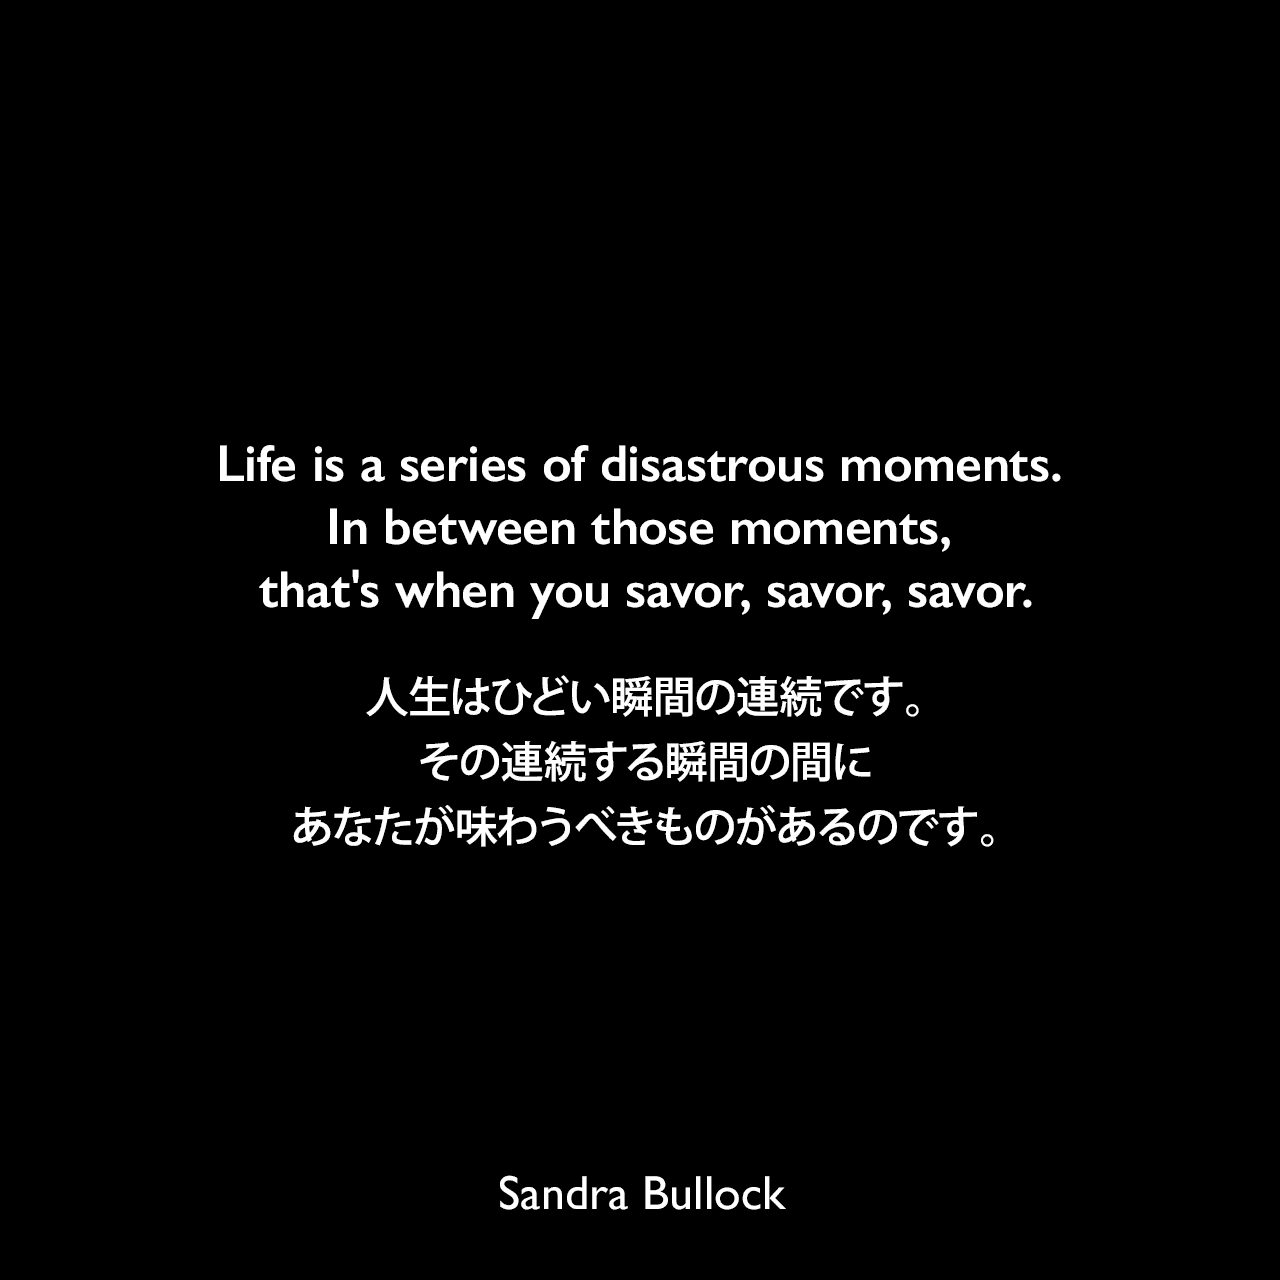 Life is a series of disastrous moments. In between those moments, that's when you savor, savor, savor.人生はひどい瞬間の連続です。その連続する瞬間の間に、あなたが味わうべきものがあるのです。Sandra Bullock